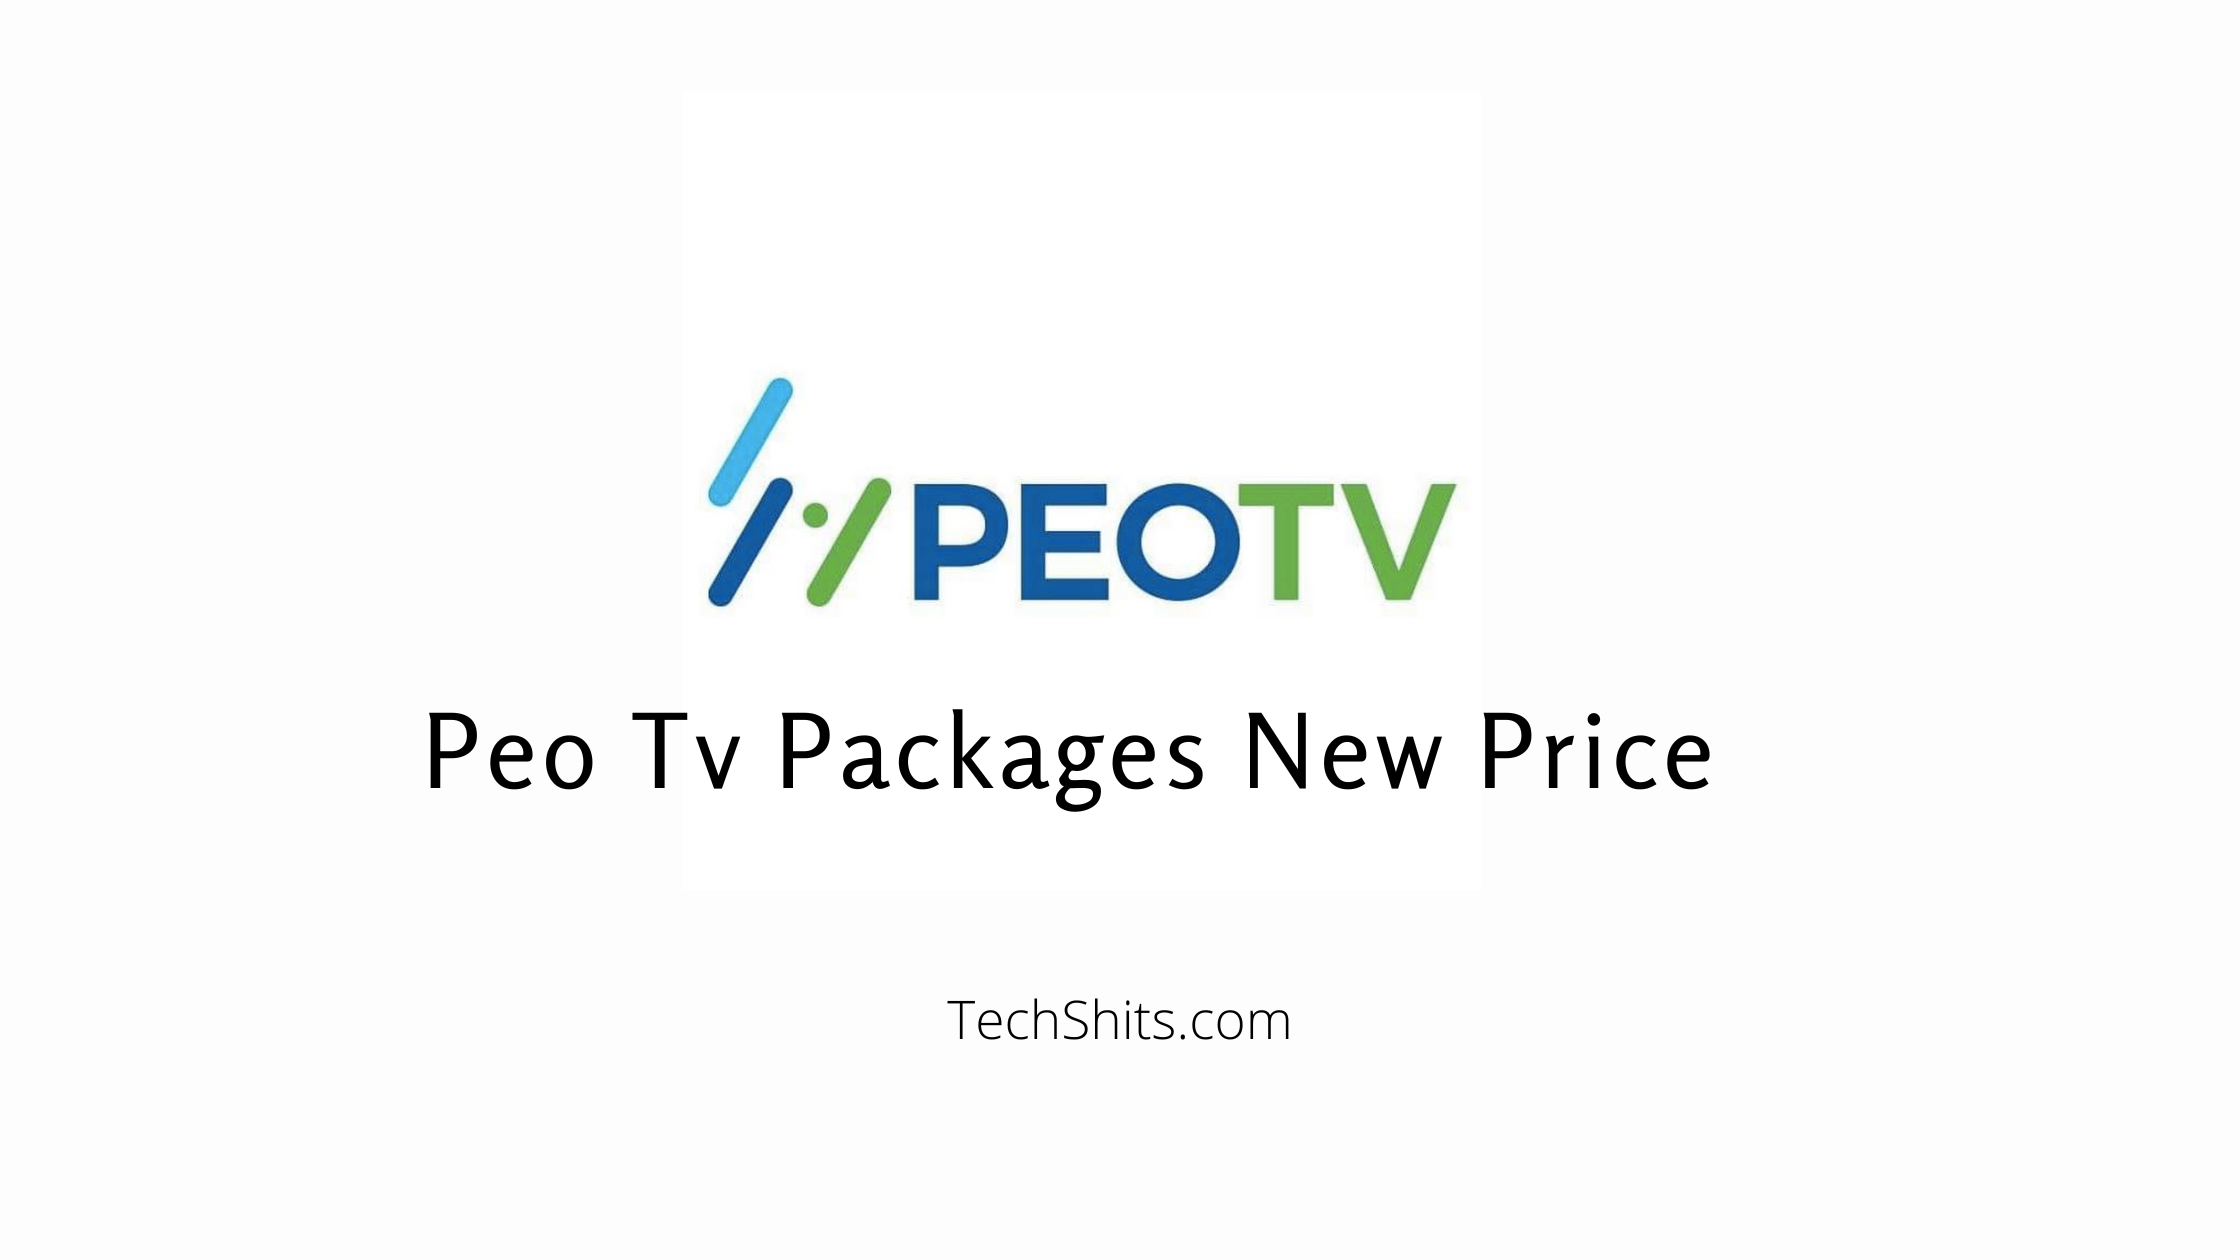 Peo Tv Packages New Price